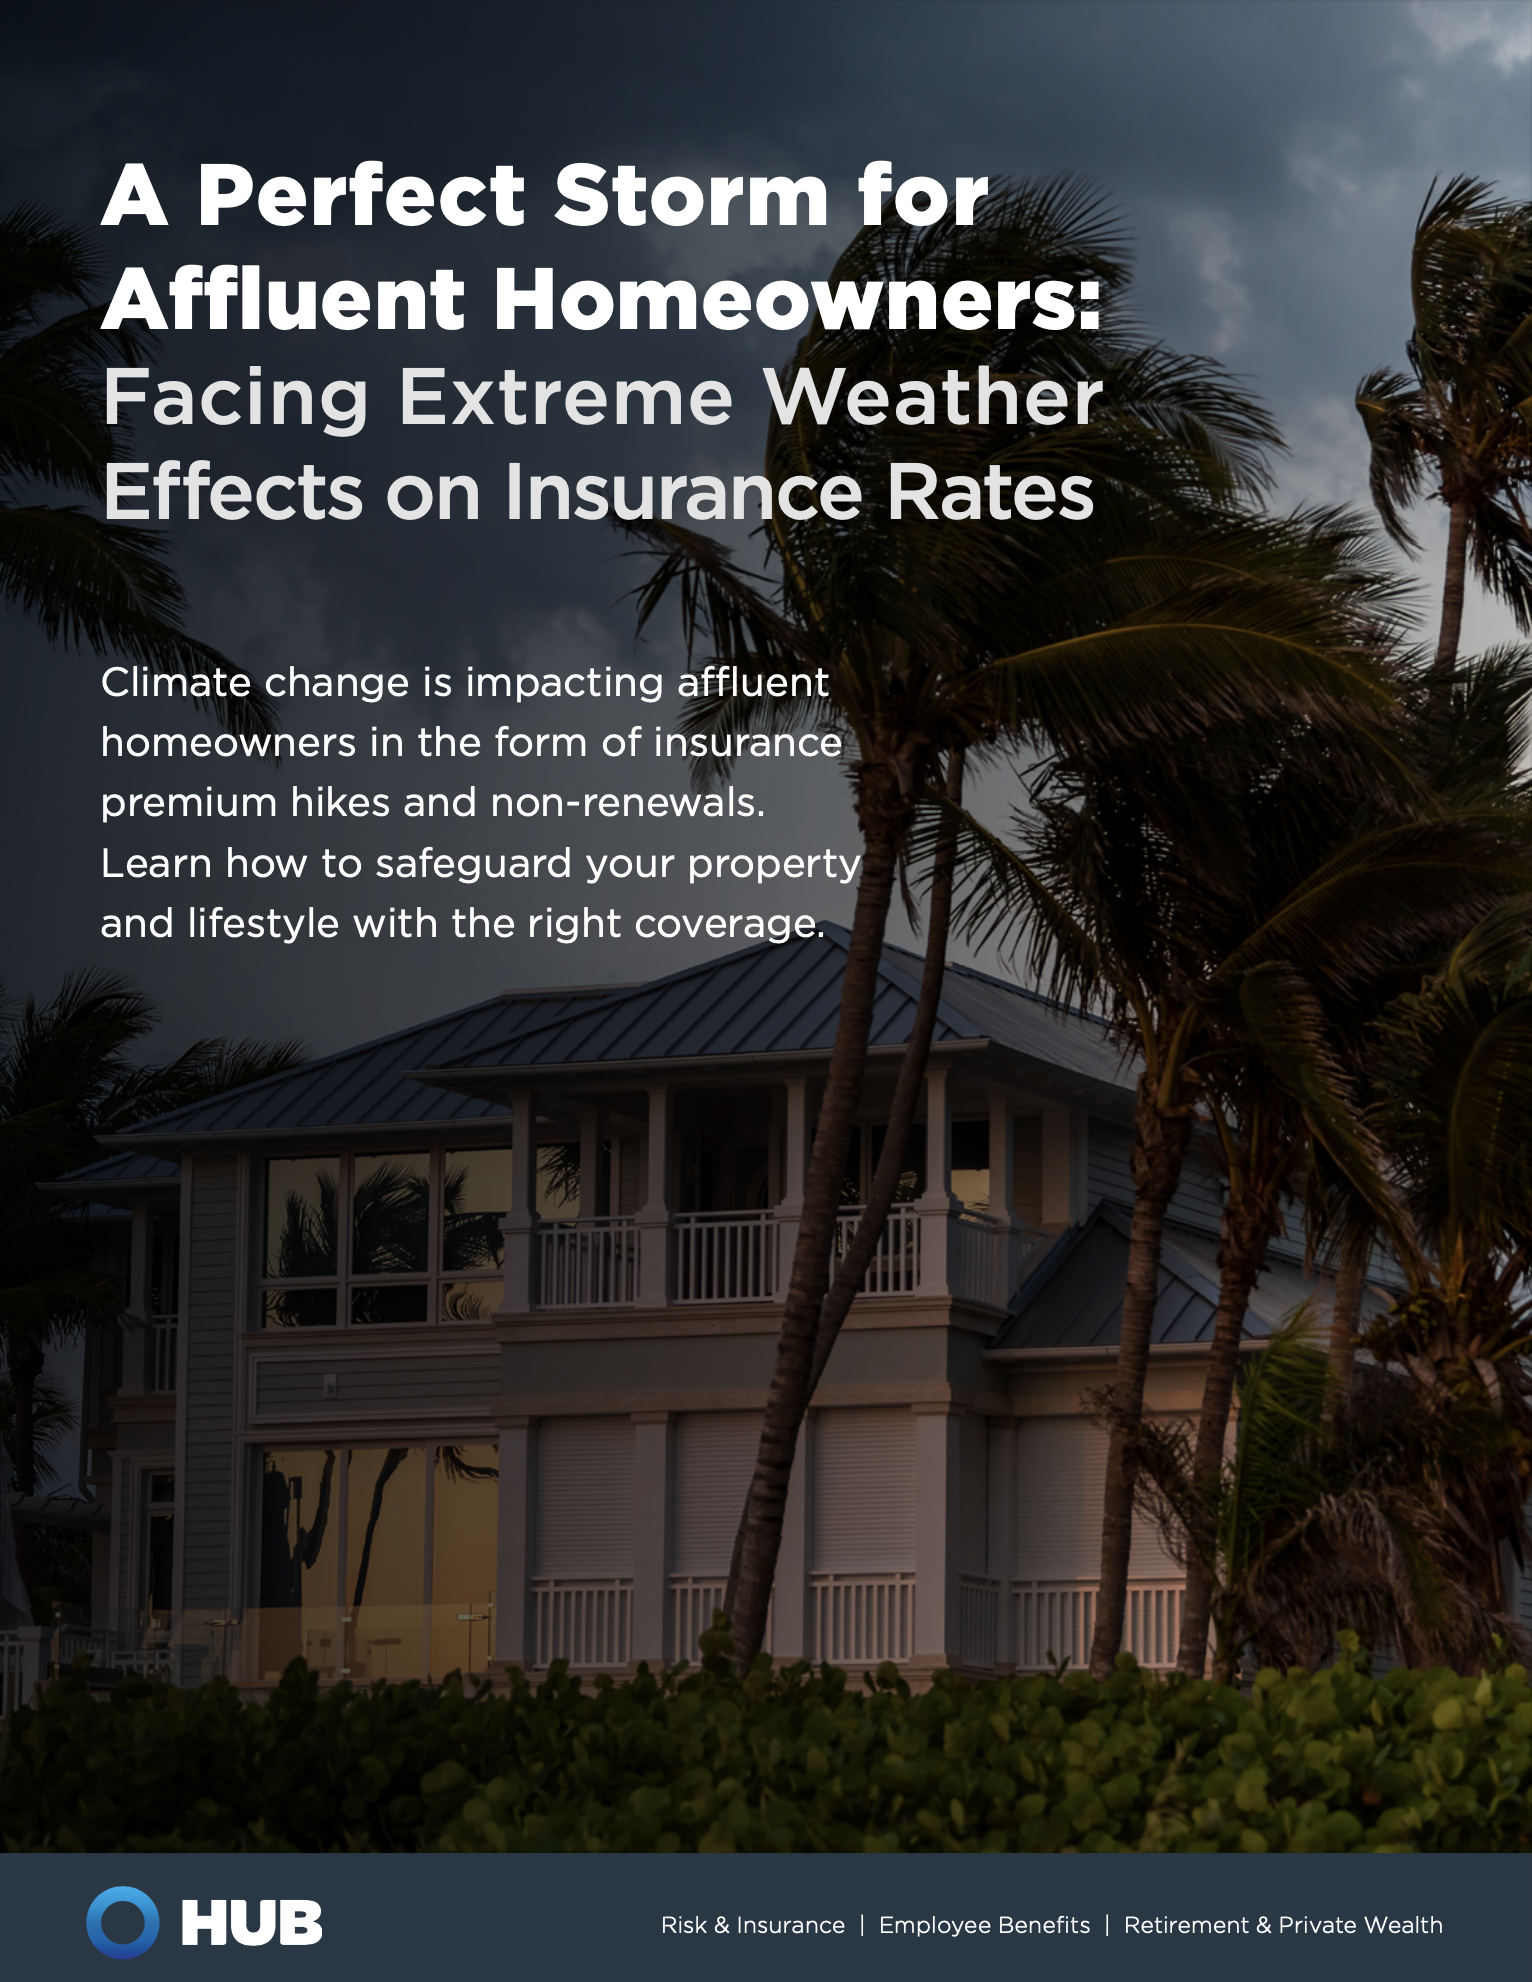 A Perfect Storm for Affluent Homeowners